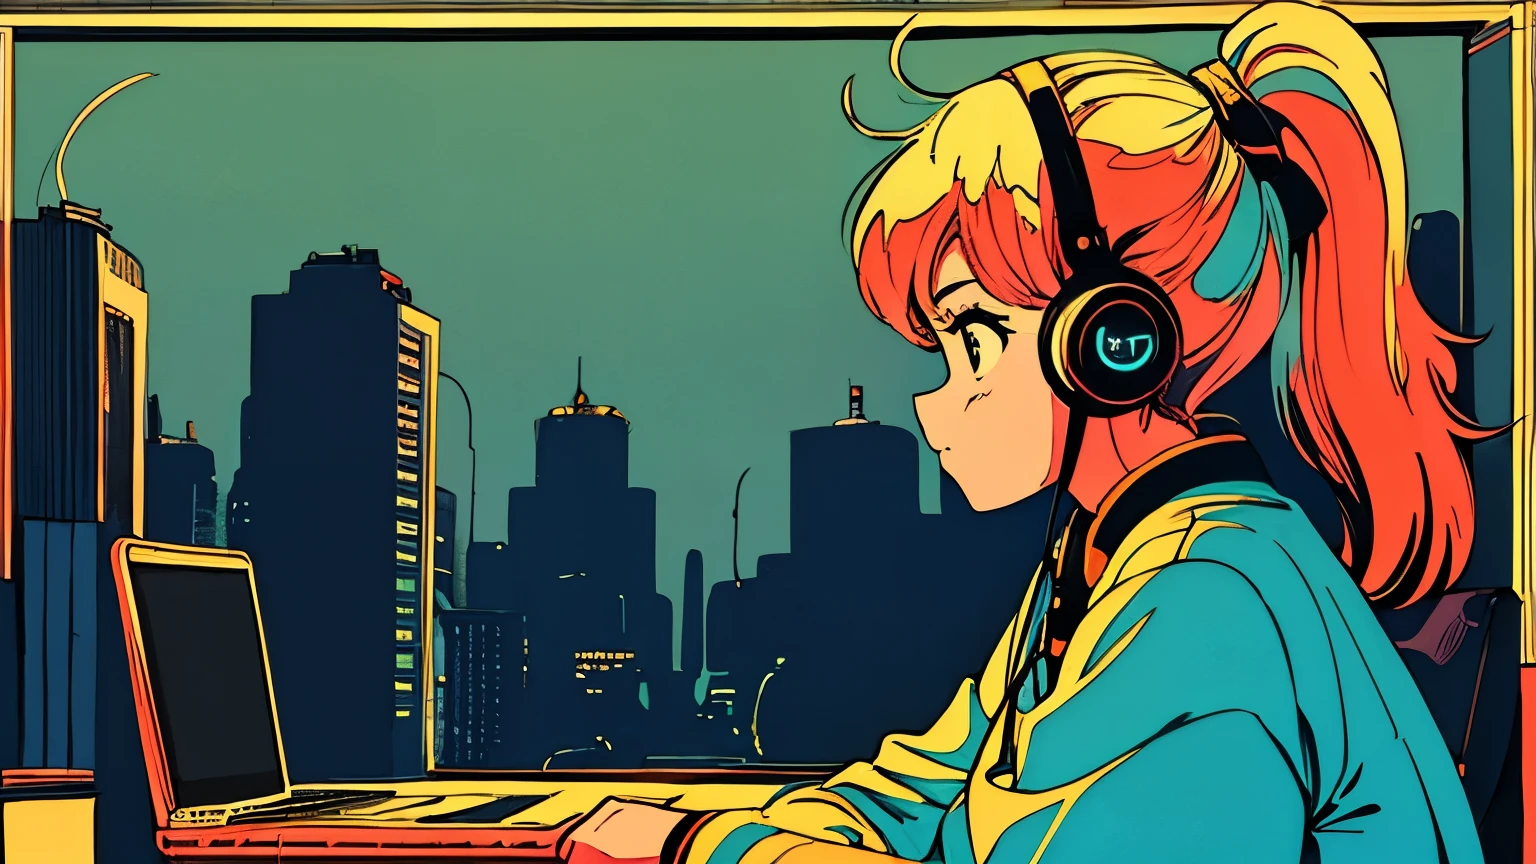 fine, City pop style art, Yellow Hair, ponytail, Wearing headphones, Futuristic yet lo-fi, Retro, Vintage, Ghost, masterpiece, (( Side Shot)), Sit at a desk and concentrate on studying, Laptop and coffee on the desk, Building silhouette, (( Midnight )), (( Looking down ))